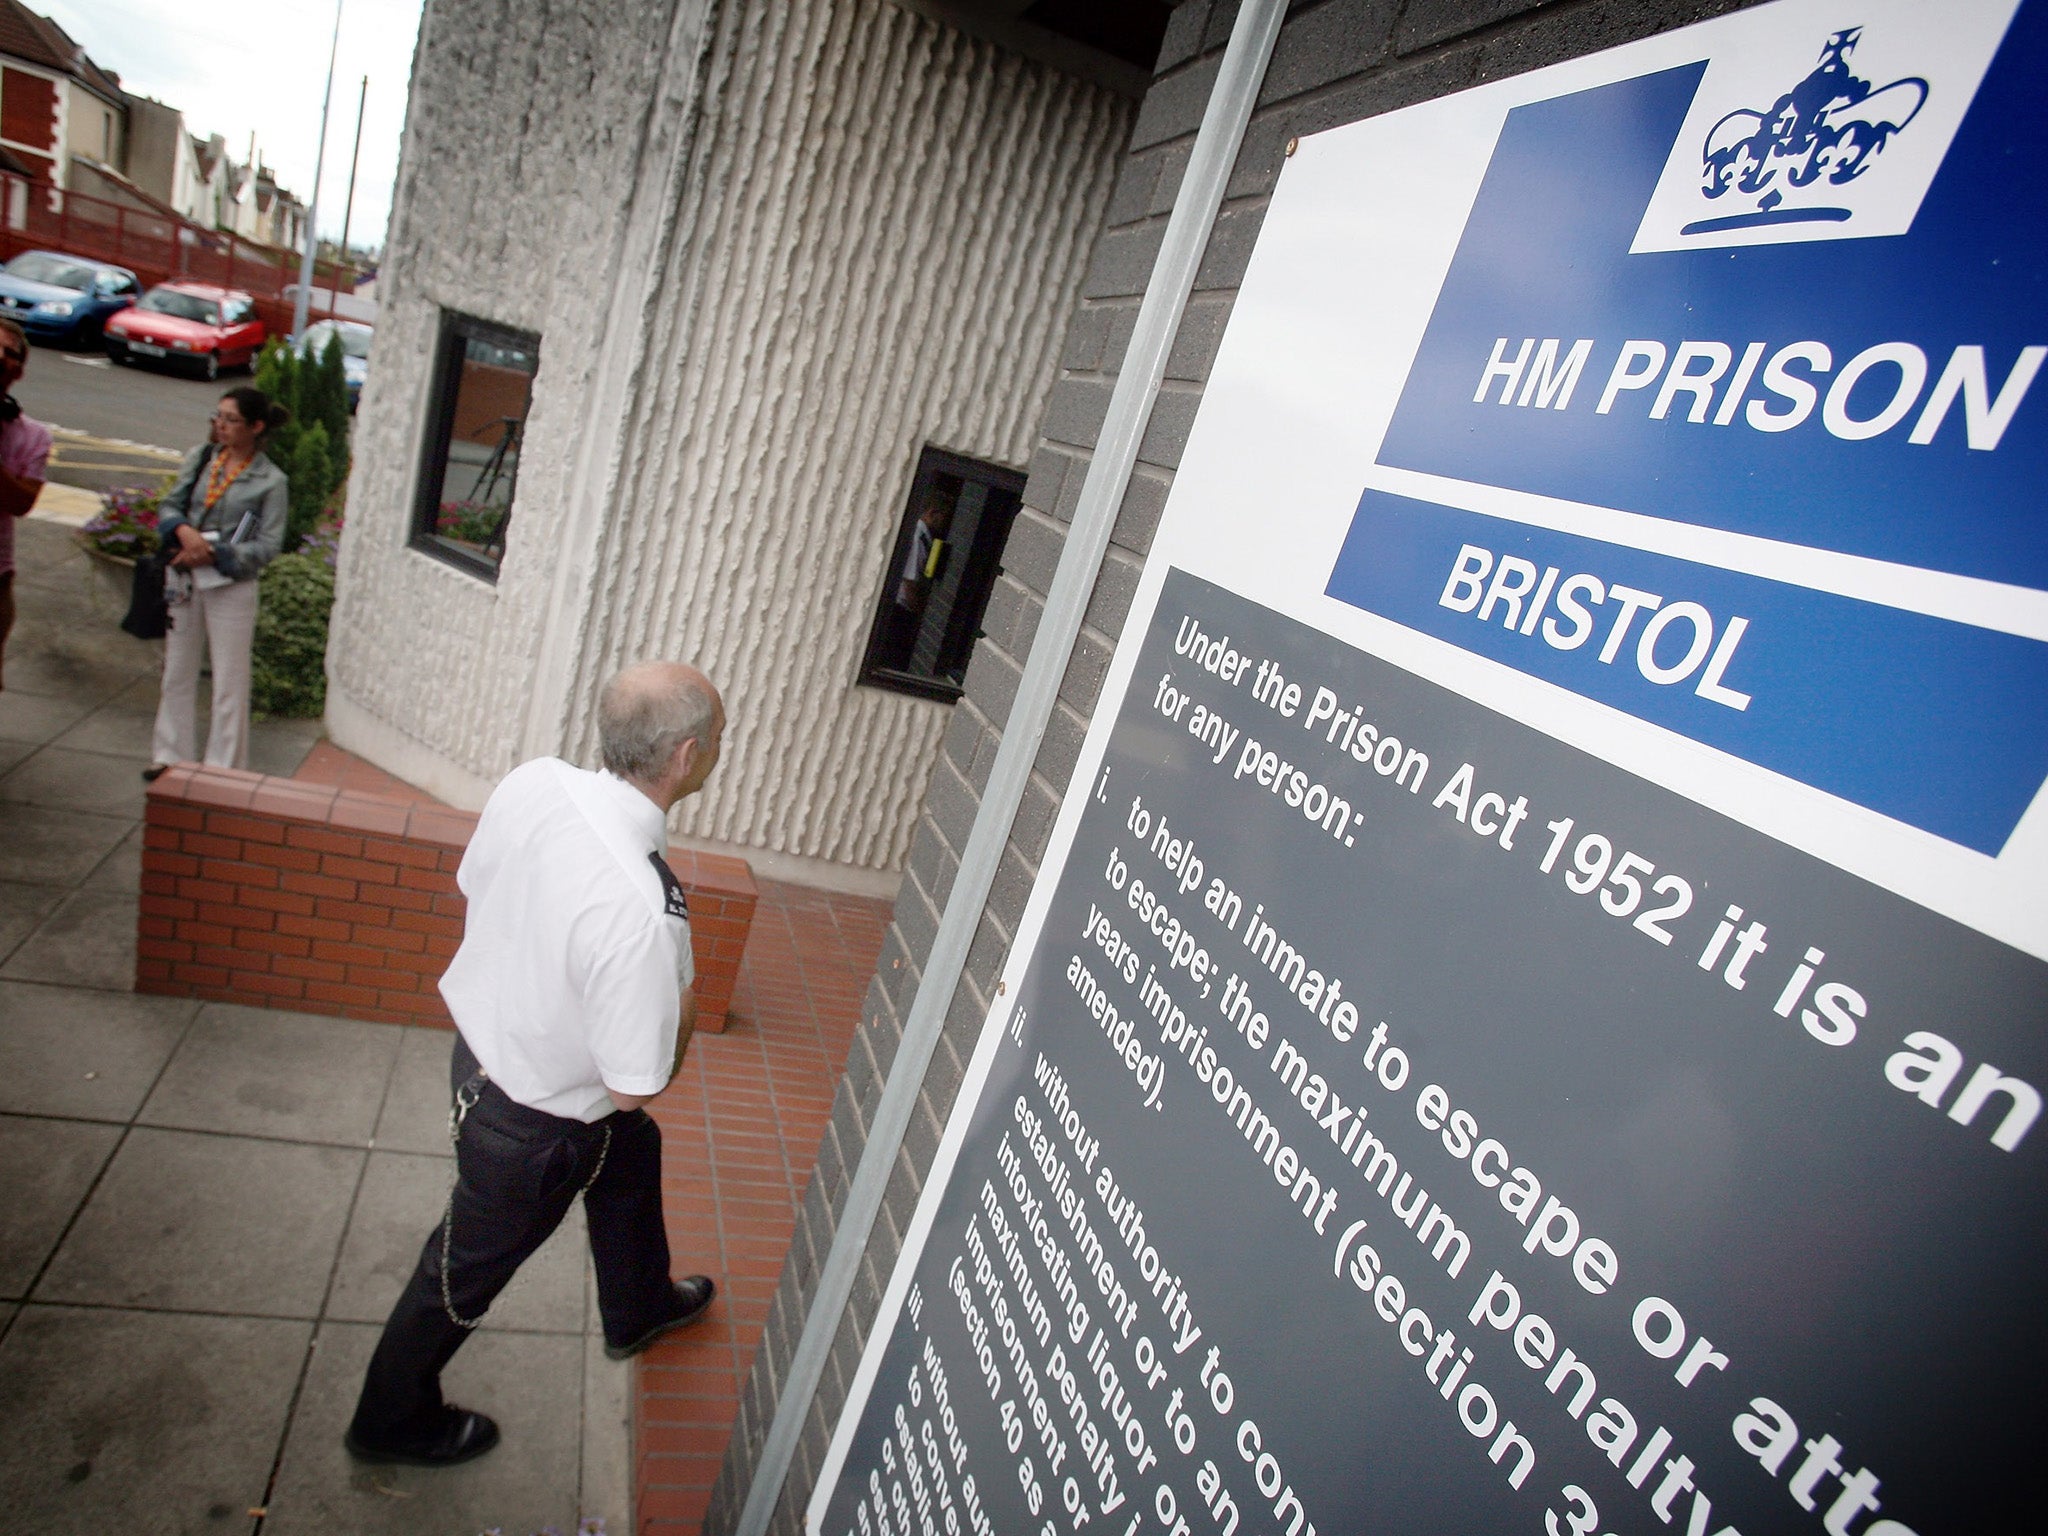 HMP Bristol was issued with a previous urgent notification in 2019 but has worsened